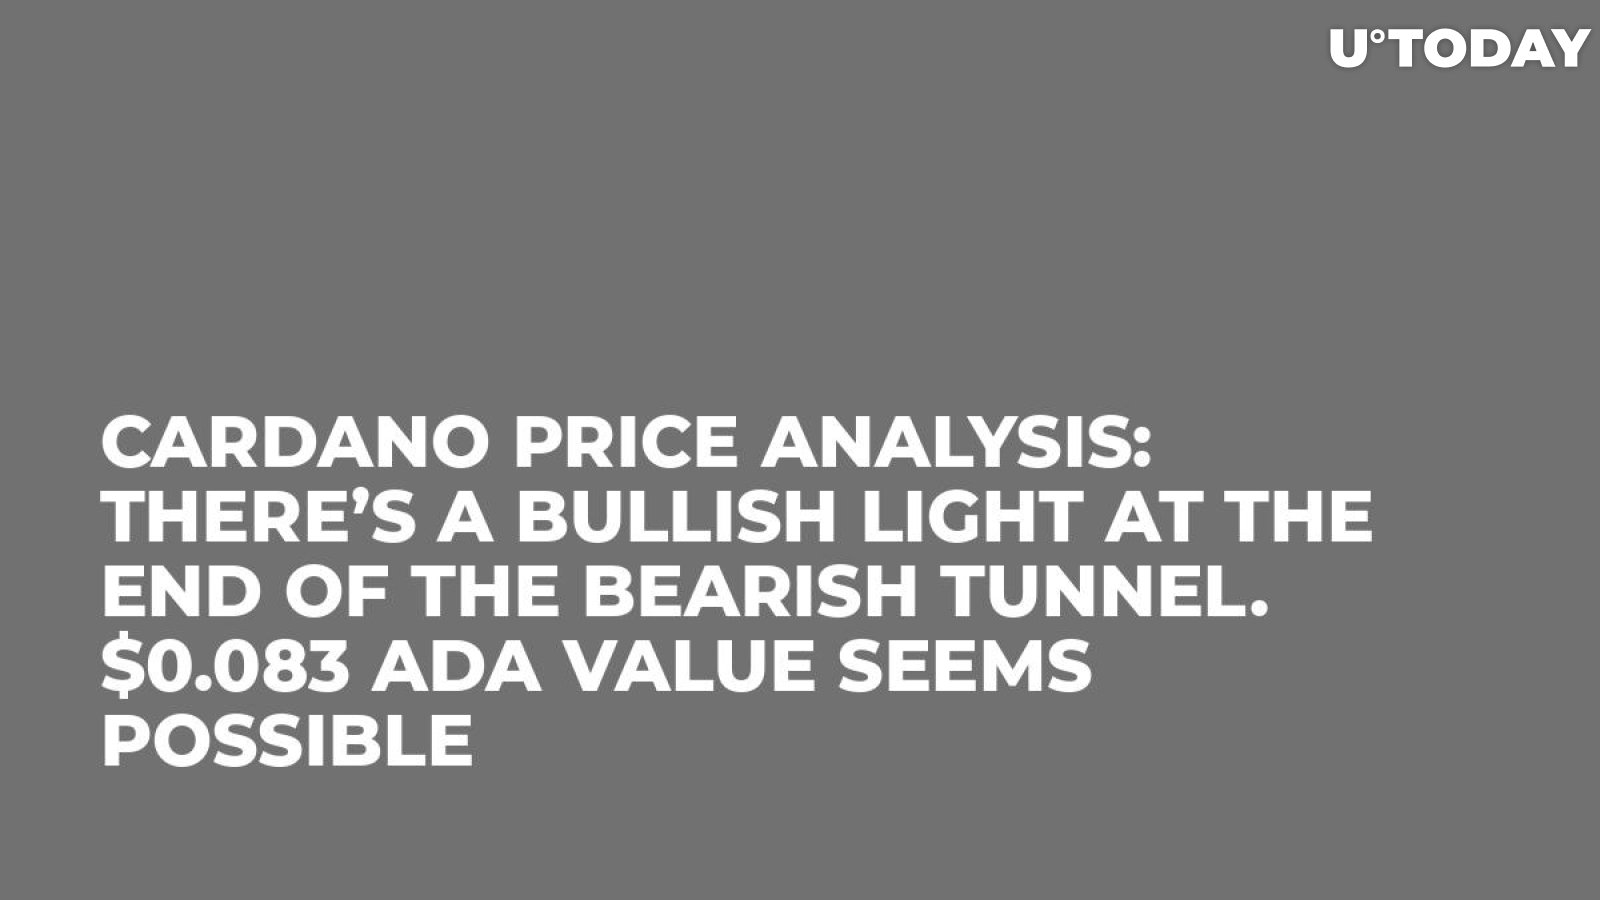 Cardano Price Analysis: There’s a Bullish Light at the End of the Bearish Tunnel. $0.083 ADA Value Seems Possible